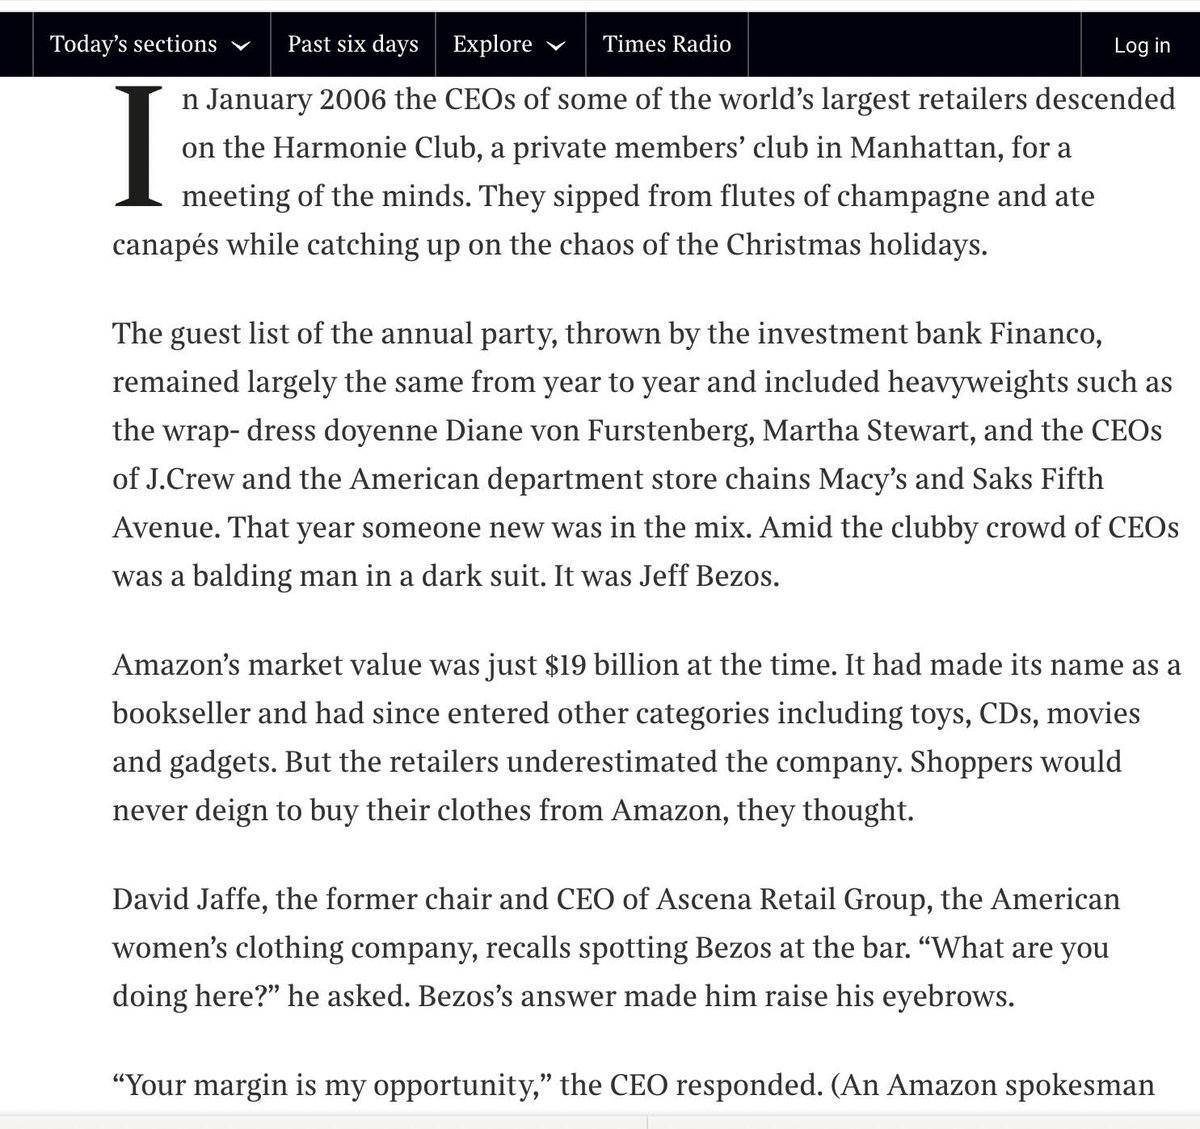 Love this anecdote from the @thetimes excerpt this weekend. Bezos attends an apparel gala in 2006, back when those CEOs dismissed Amazon. “What are you doing here?” an apparel CEO asks Bezos. “Your margin is my opportunity,” Bezos responded. thetimes.co.uk/article/b92bc9…